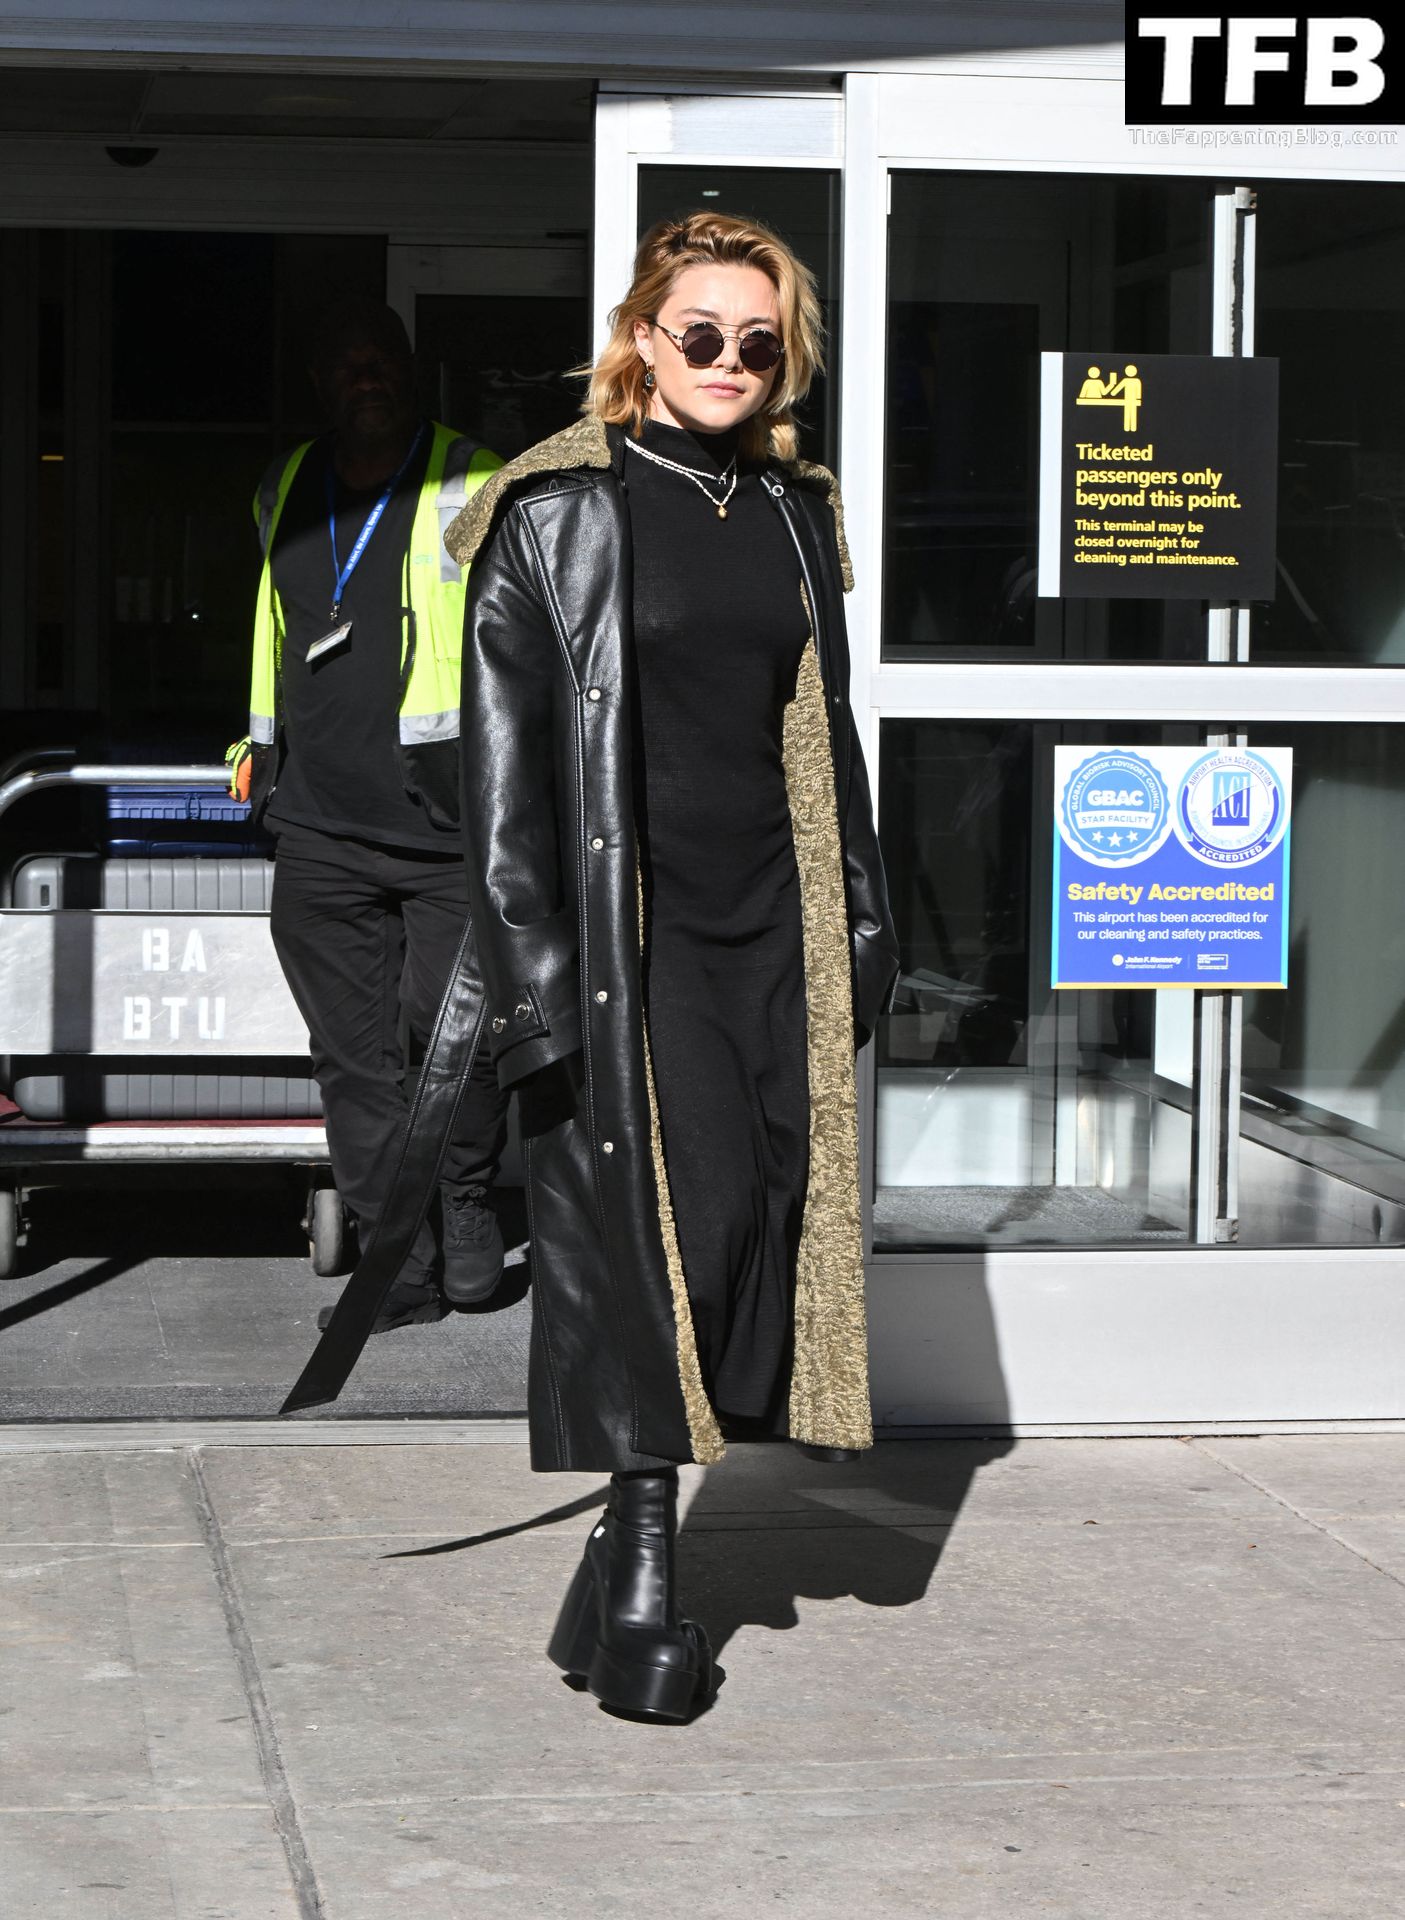 Florence Pugh Pokies The Fappening Blog 11 - Florence Pugh Shows Off Her Pokies at JFK airport in NYC (31 Photos)